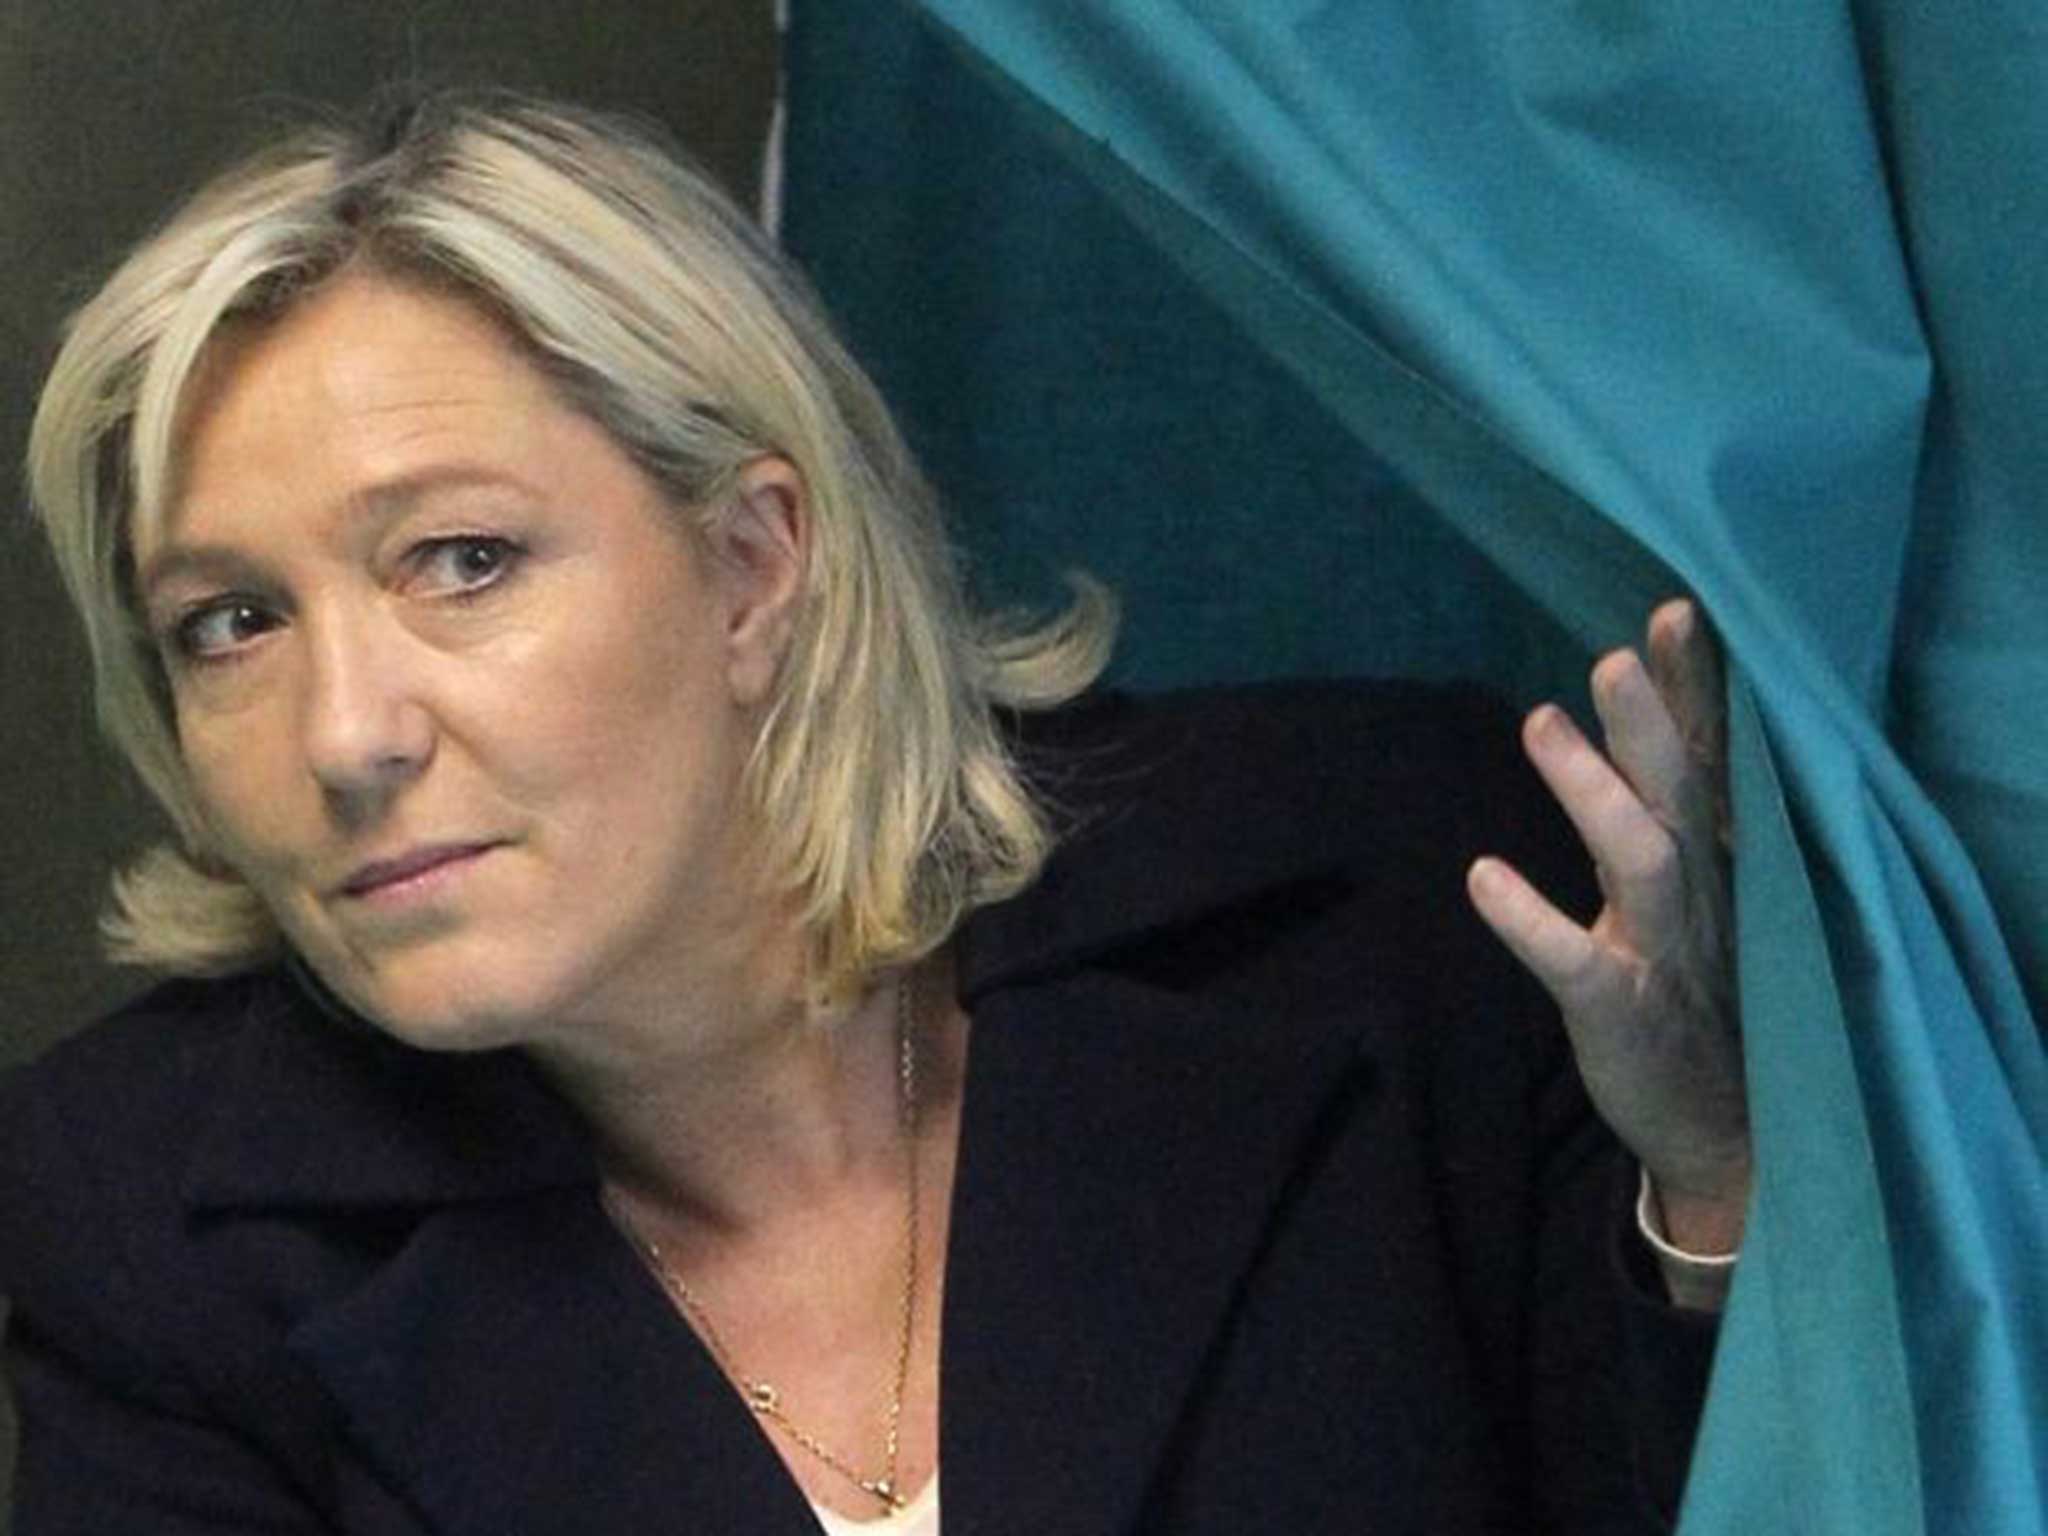 Le Pen at a public event in September: she will face court for comments made five years ago